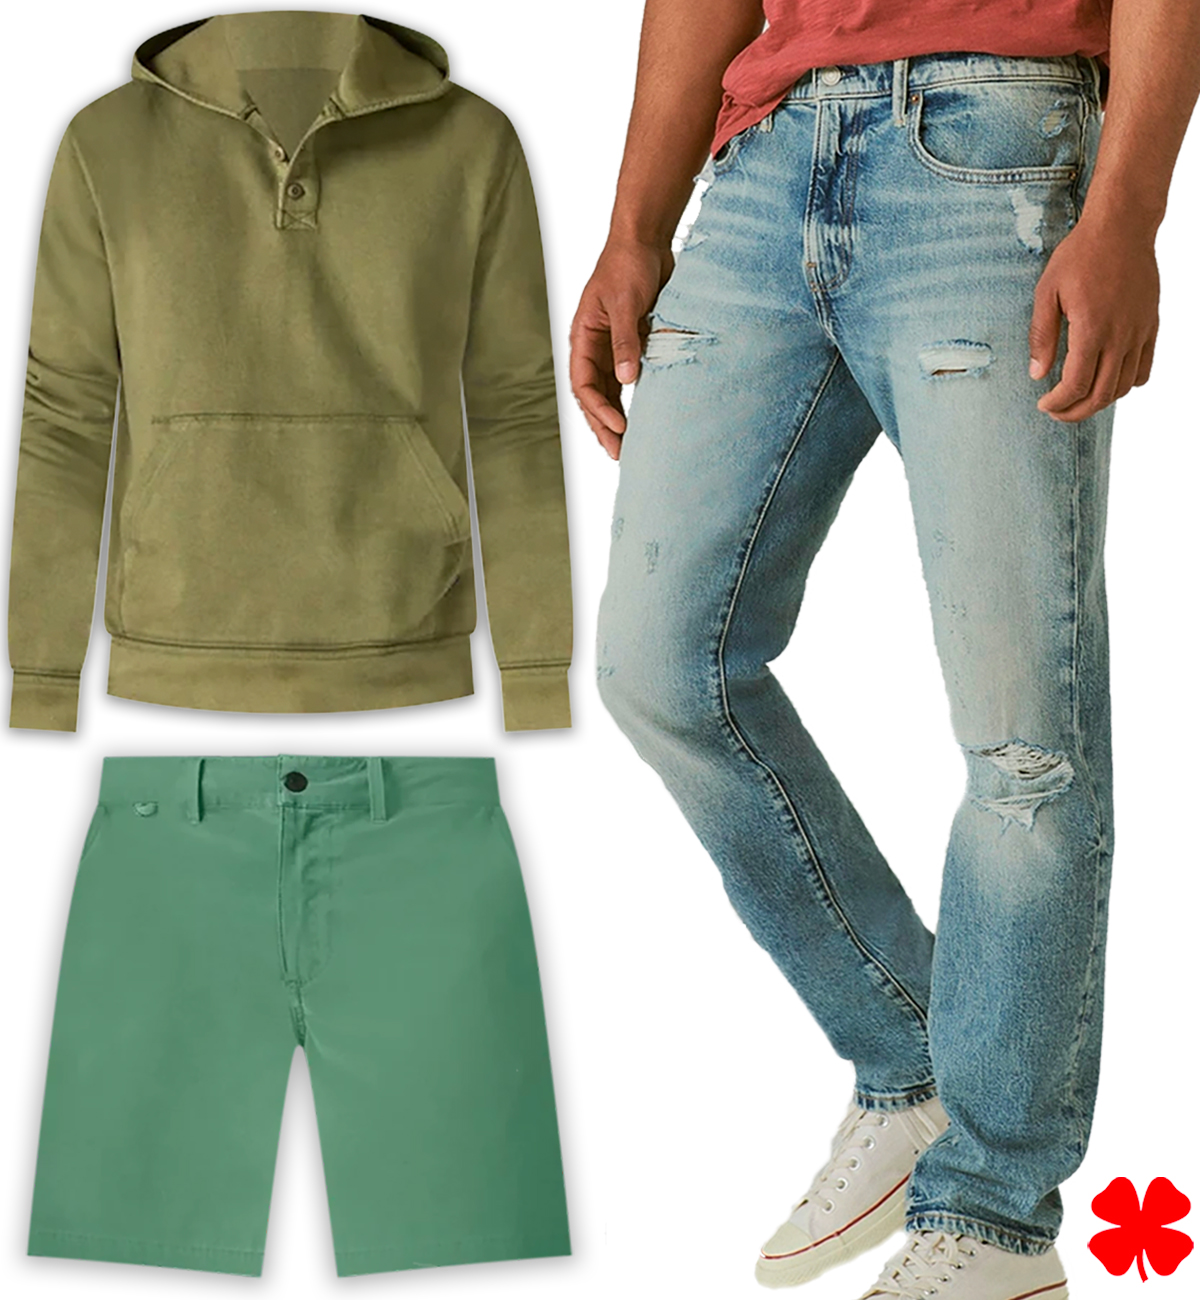 Lucky Brand: Men's Shorts (9-in Linen-Cotton, Canvas & More) $12.75, S.uededHoodley $17 | Straight Jeans, 32-in L only (363 Hemp-Cotton or 223 Ellicott) $34 + FS on $75+